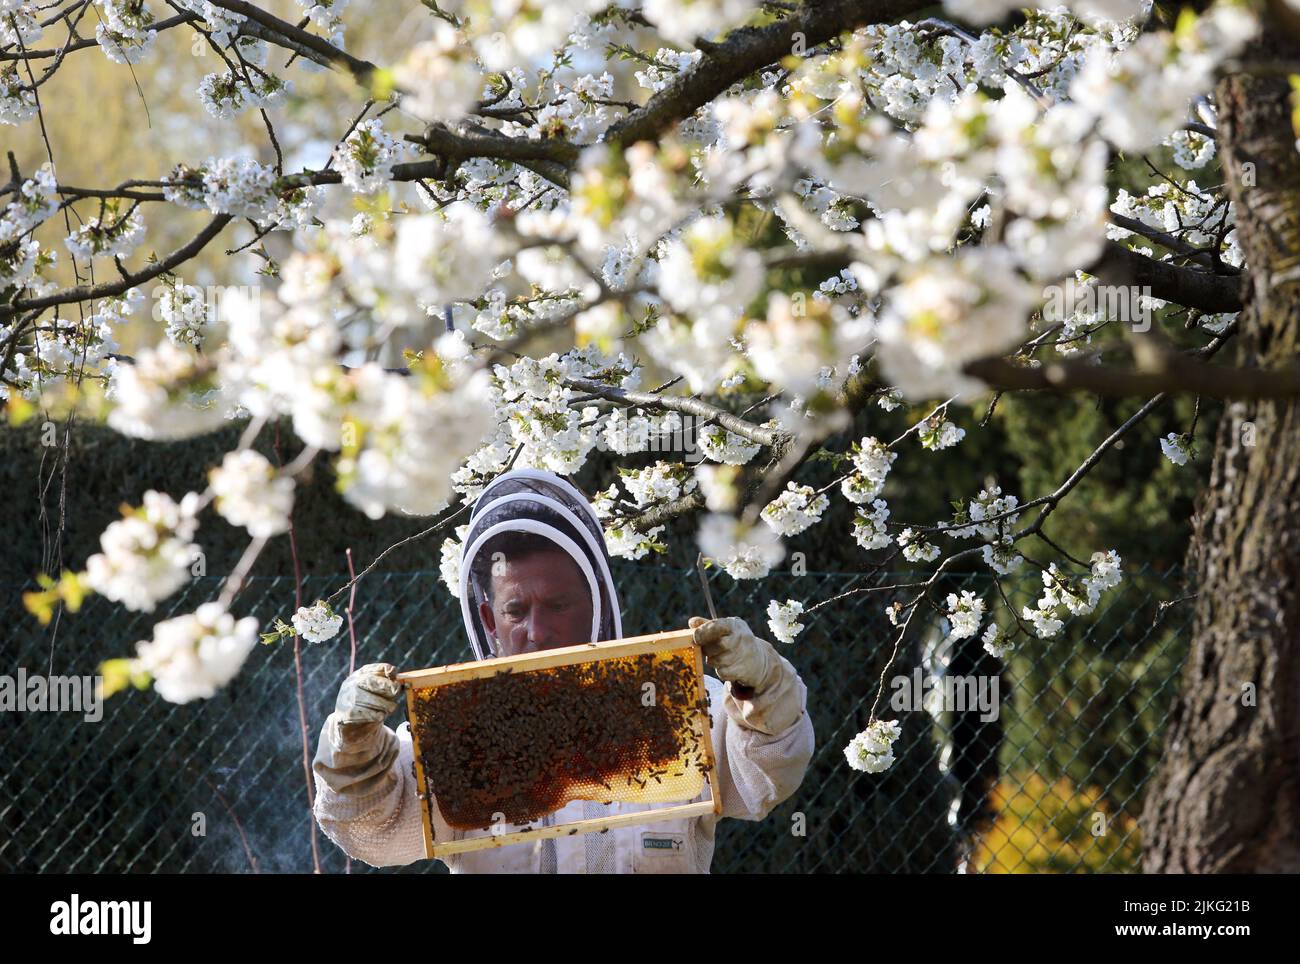 17.04.2022, Germany, Brandenburg, Neuenhagen - Beekeeper looking under a blossoming cherry tree at a honeycomb of his bee colony. 00S220417D337CAROEX. Stock Photo